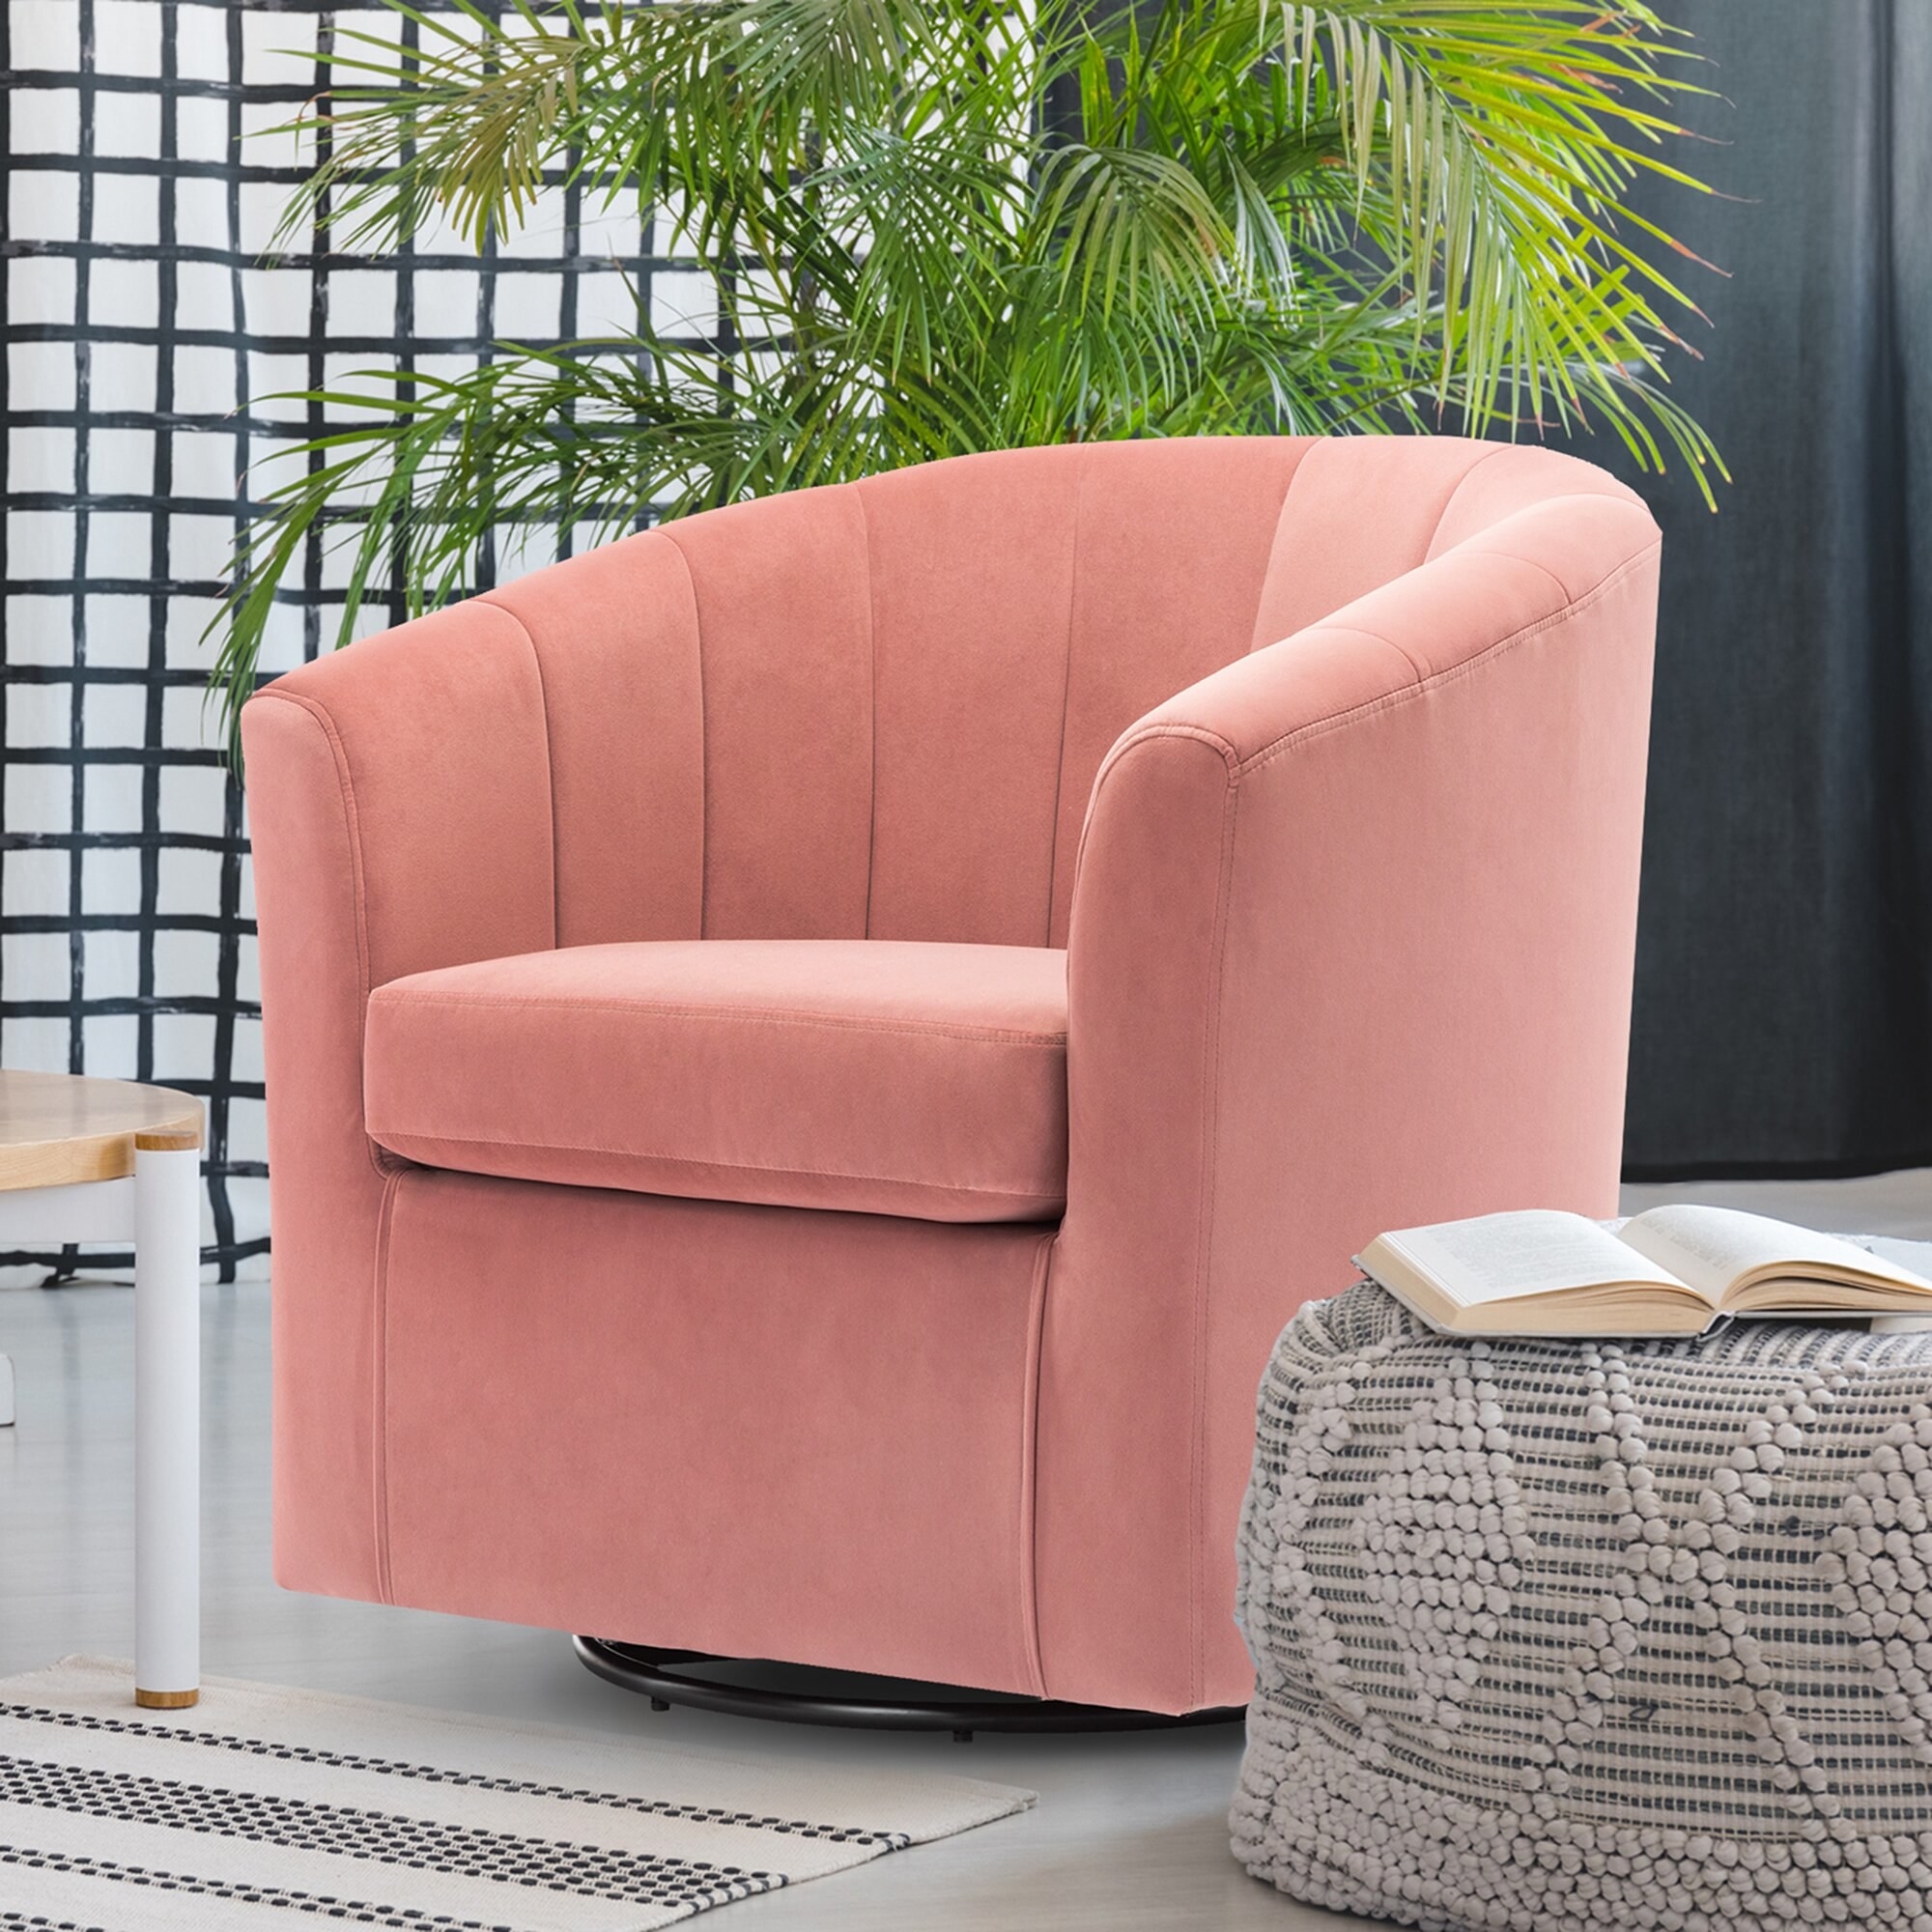 the pink swivel chair